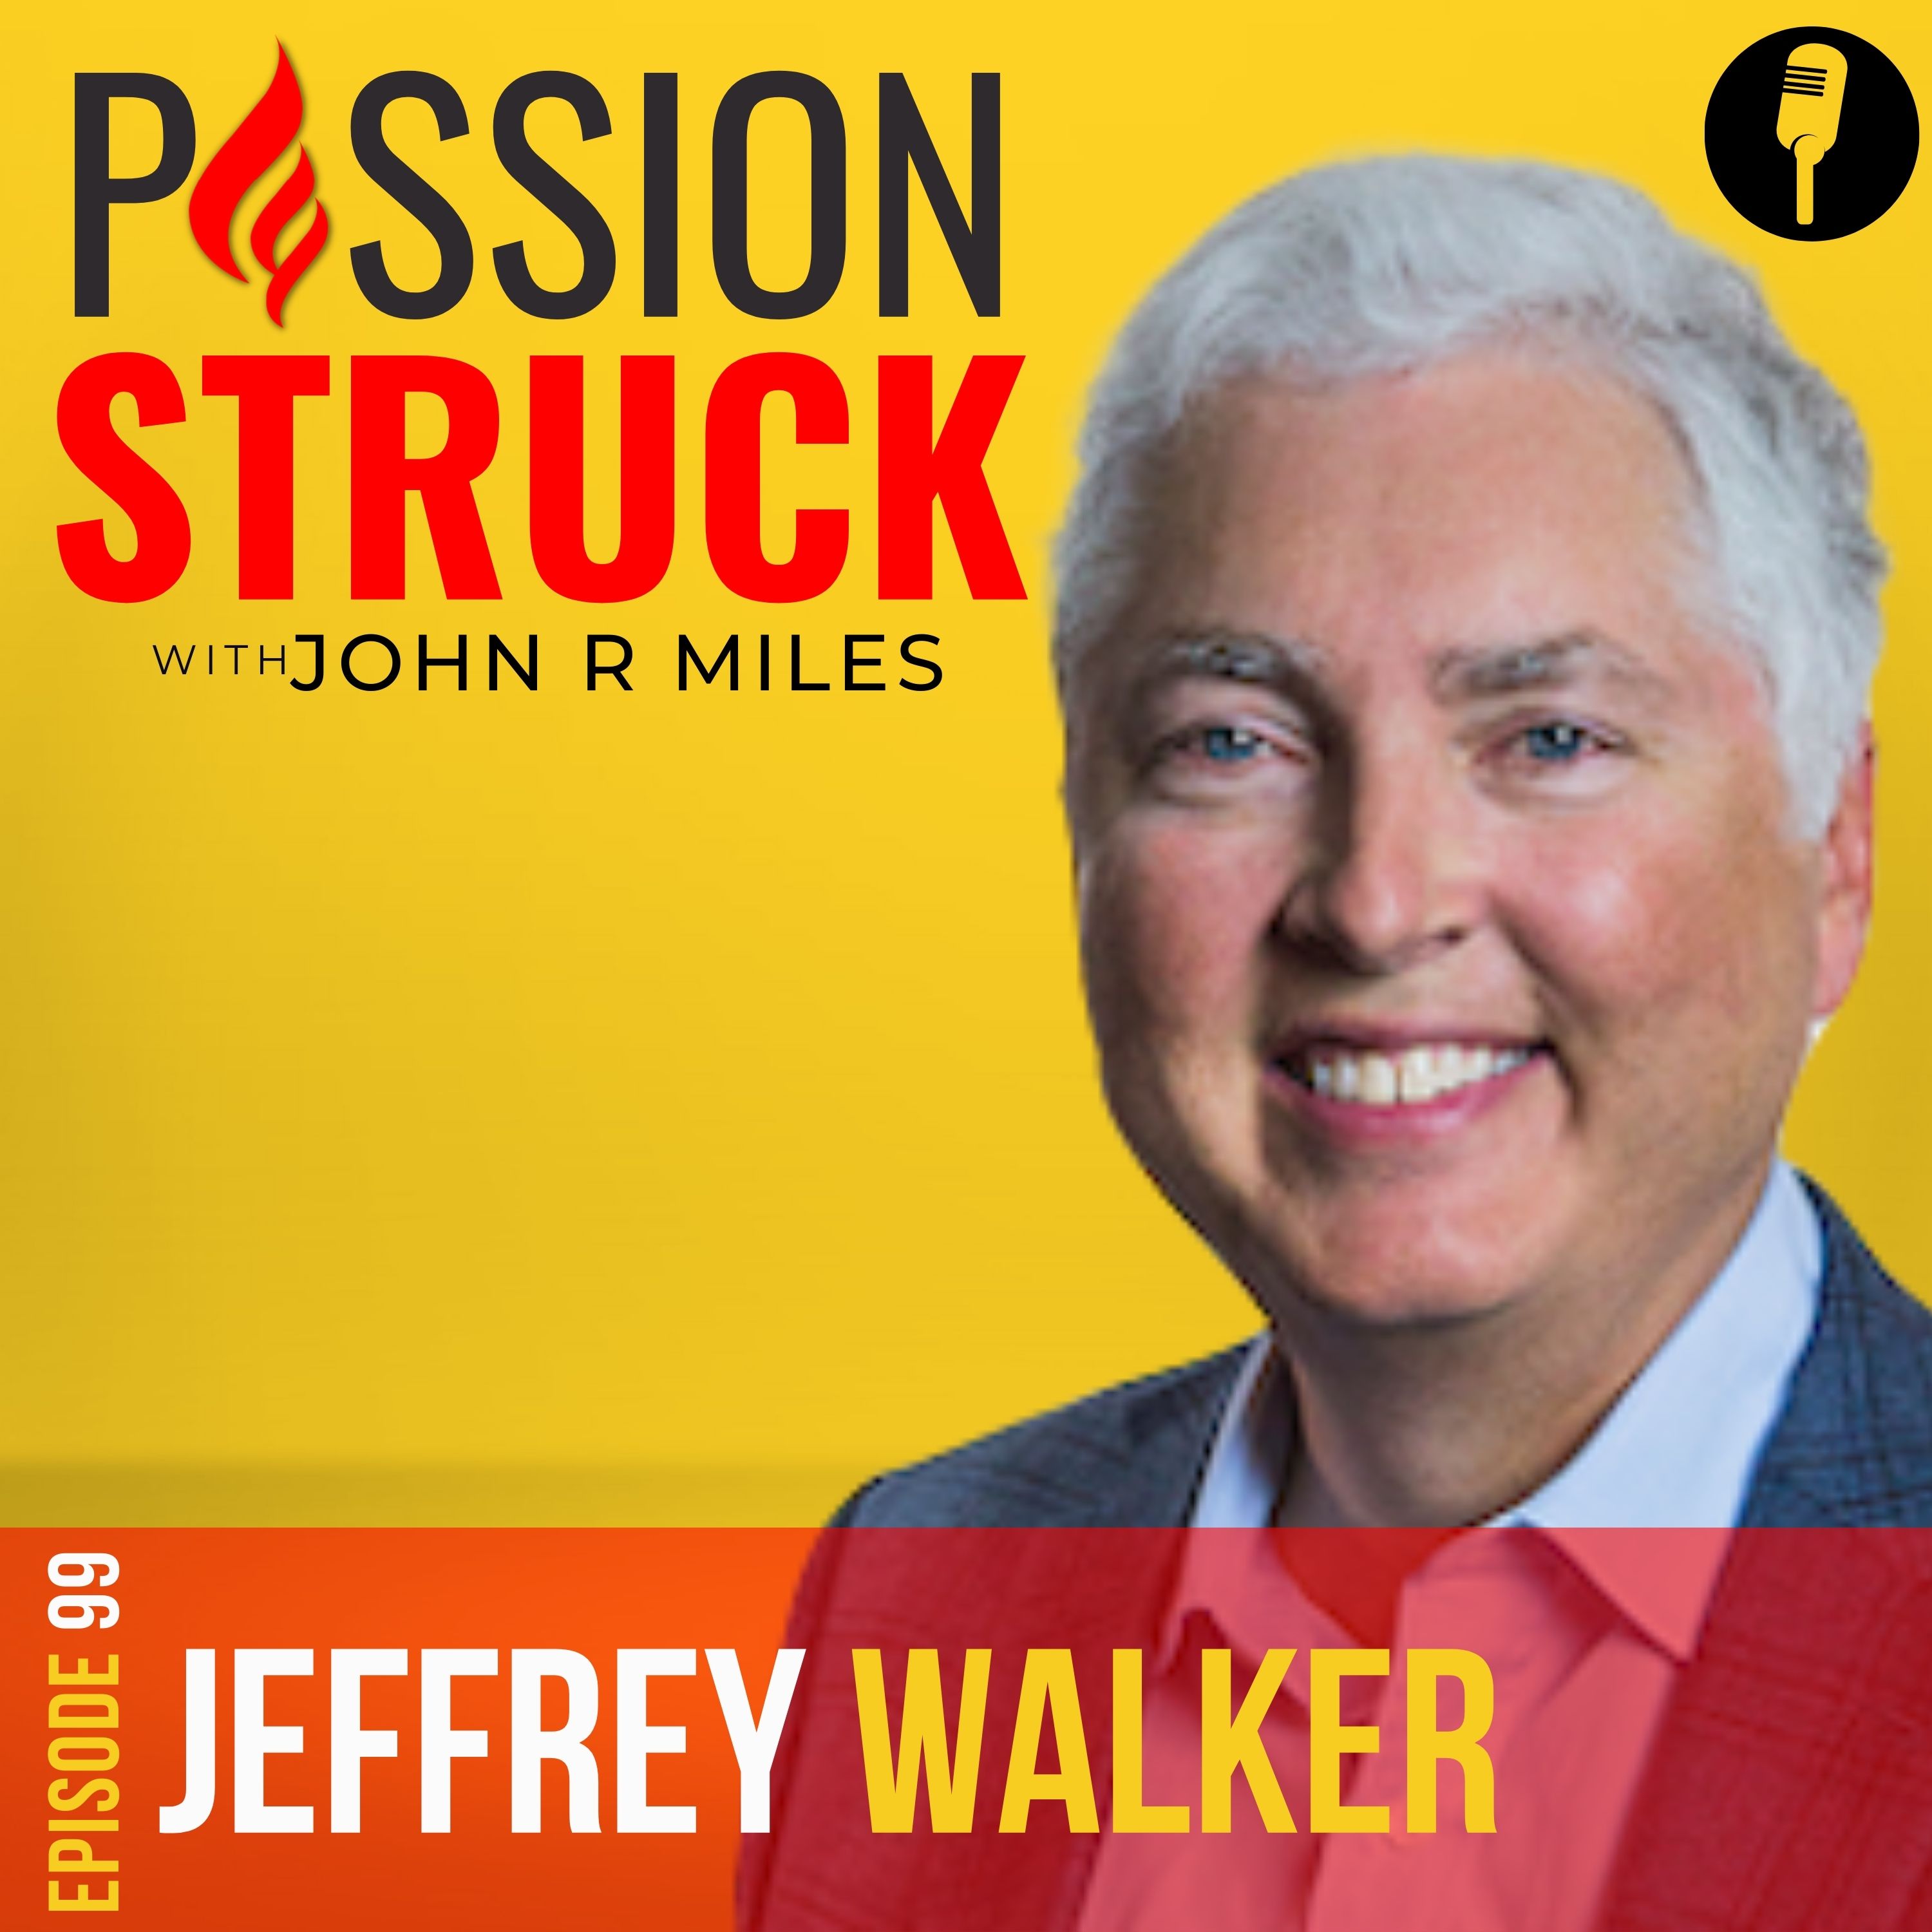 Passion Struck podcast album cover featuring Jeffrey C. Walker on collaboration and systems change